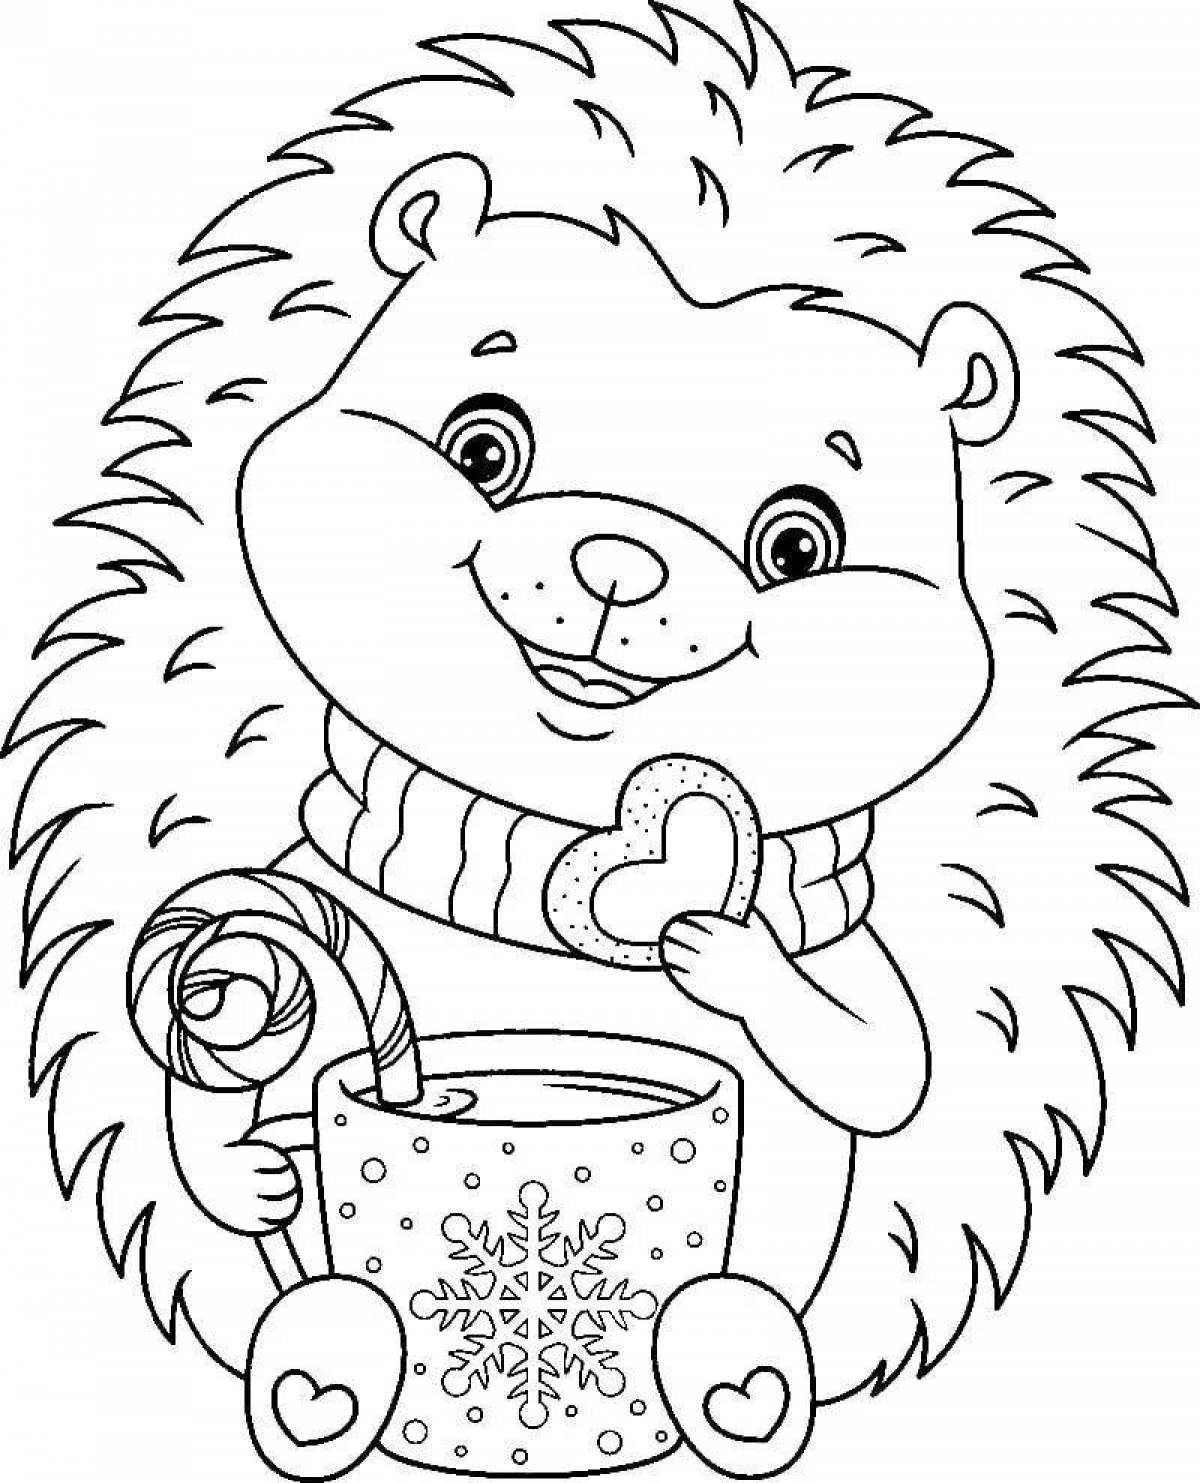 Coloring page cute and adorable hedgehog